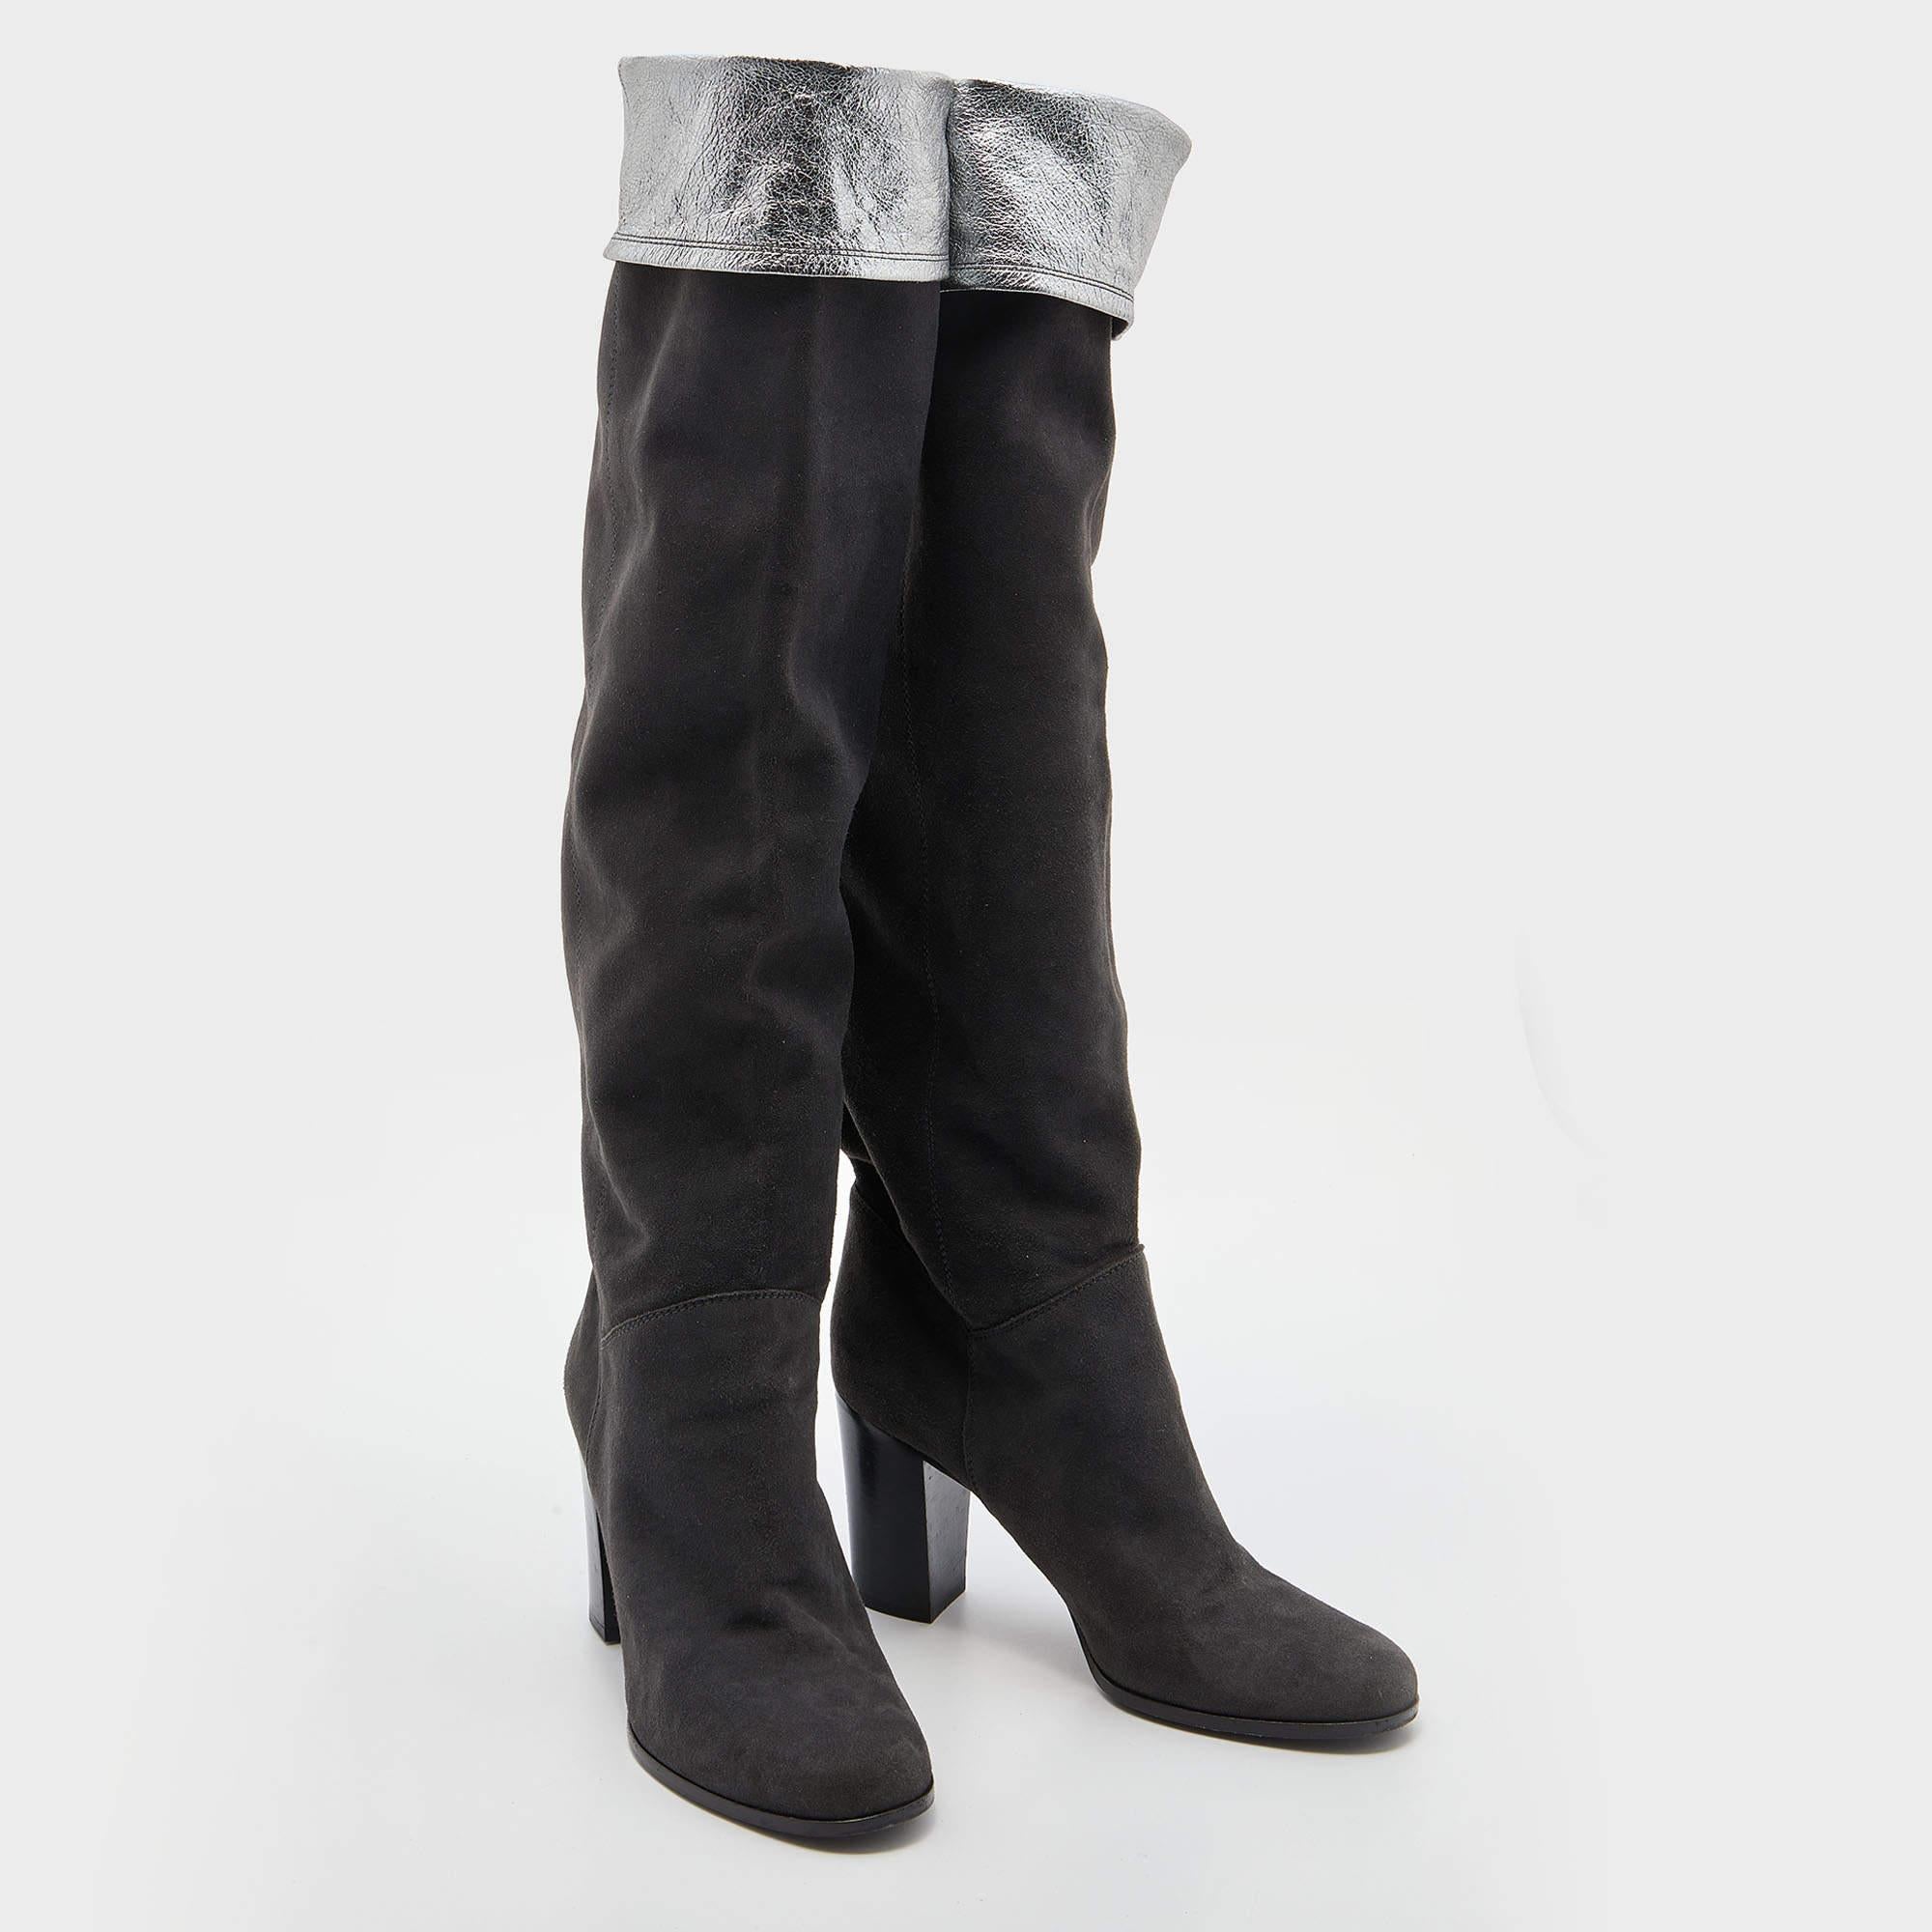 Women's Chanel Grey Suede and Leather Knee Length Boots Size 38.5